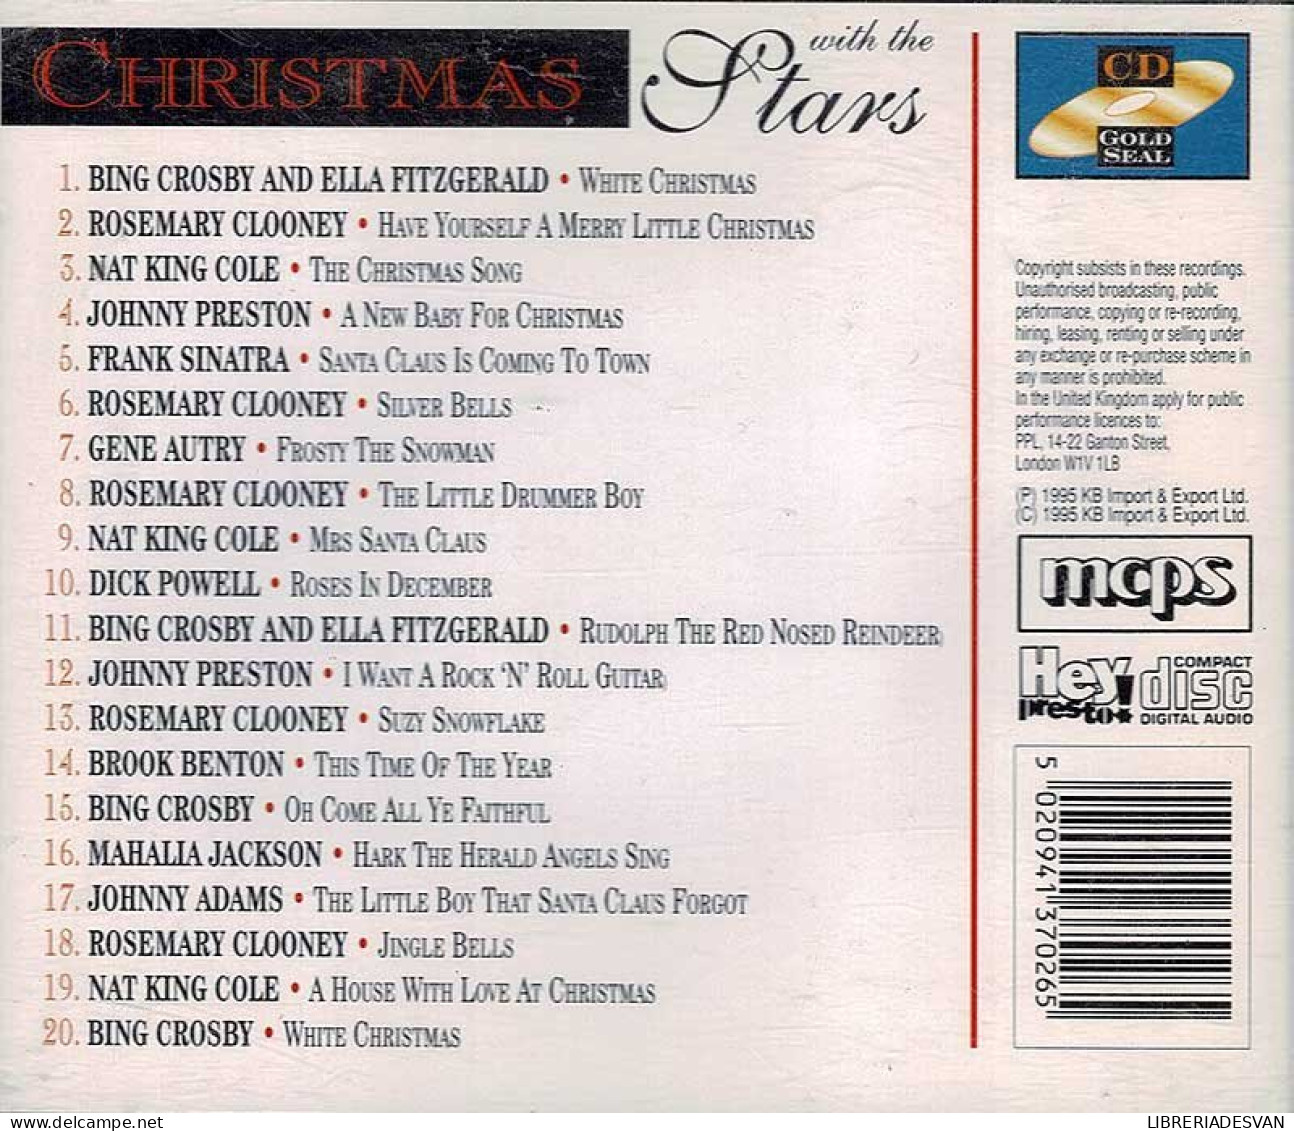 Christmas With The Stars. CD - Country En Folk